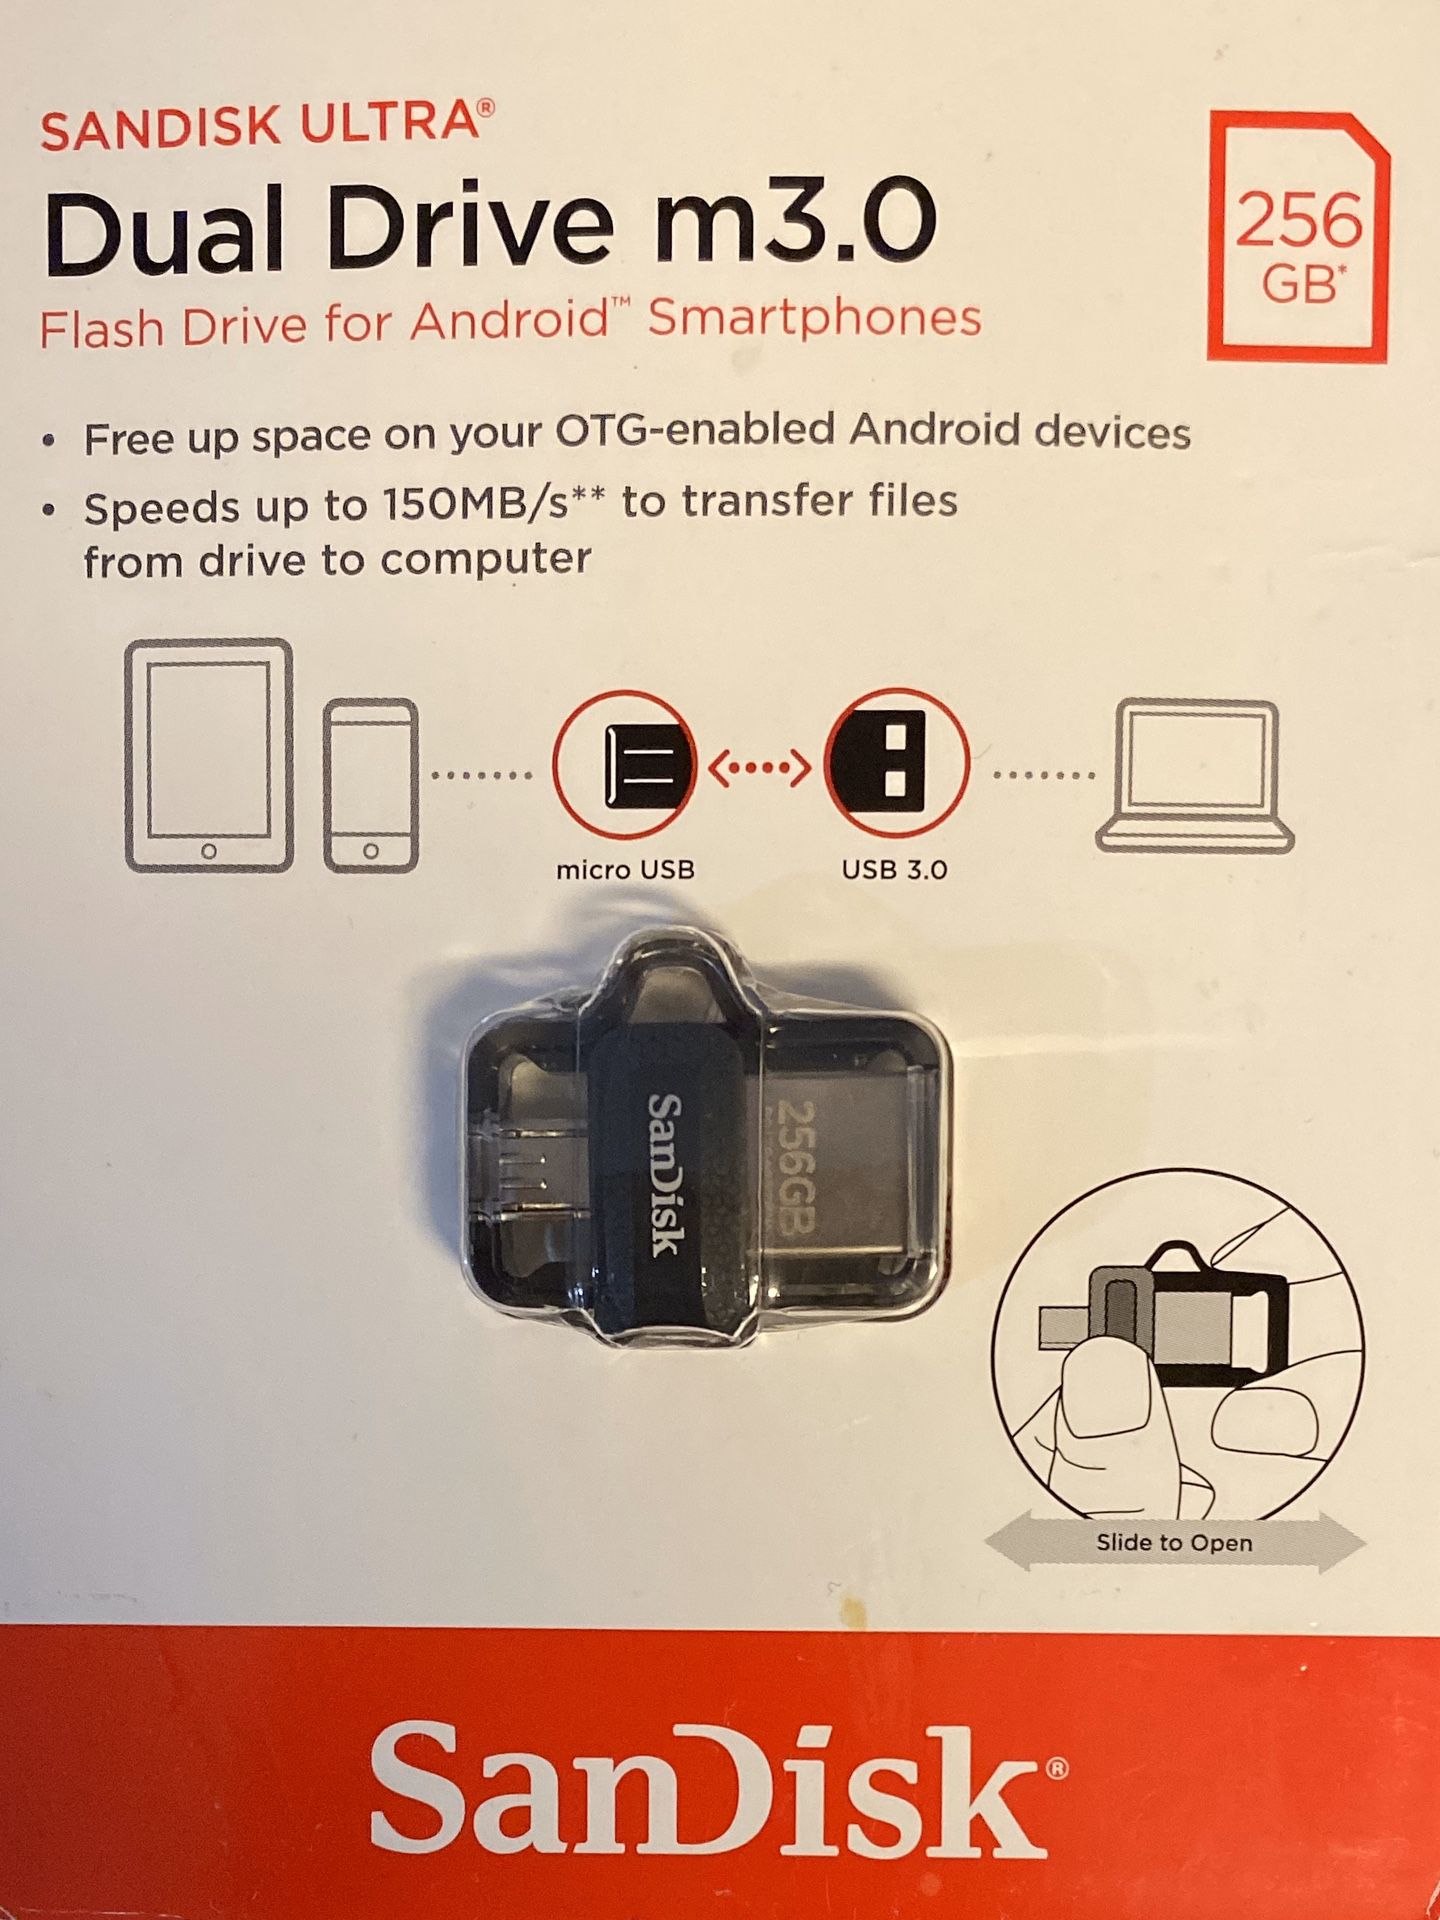 SanDisk 256GB Ultra Dual Drive m3.0 for Android Devices and Computers - microUSB, USB 3.0